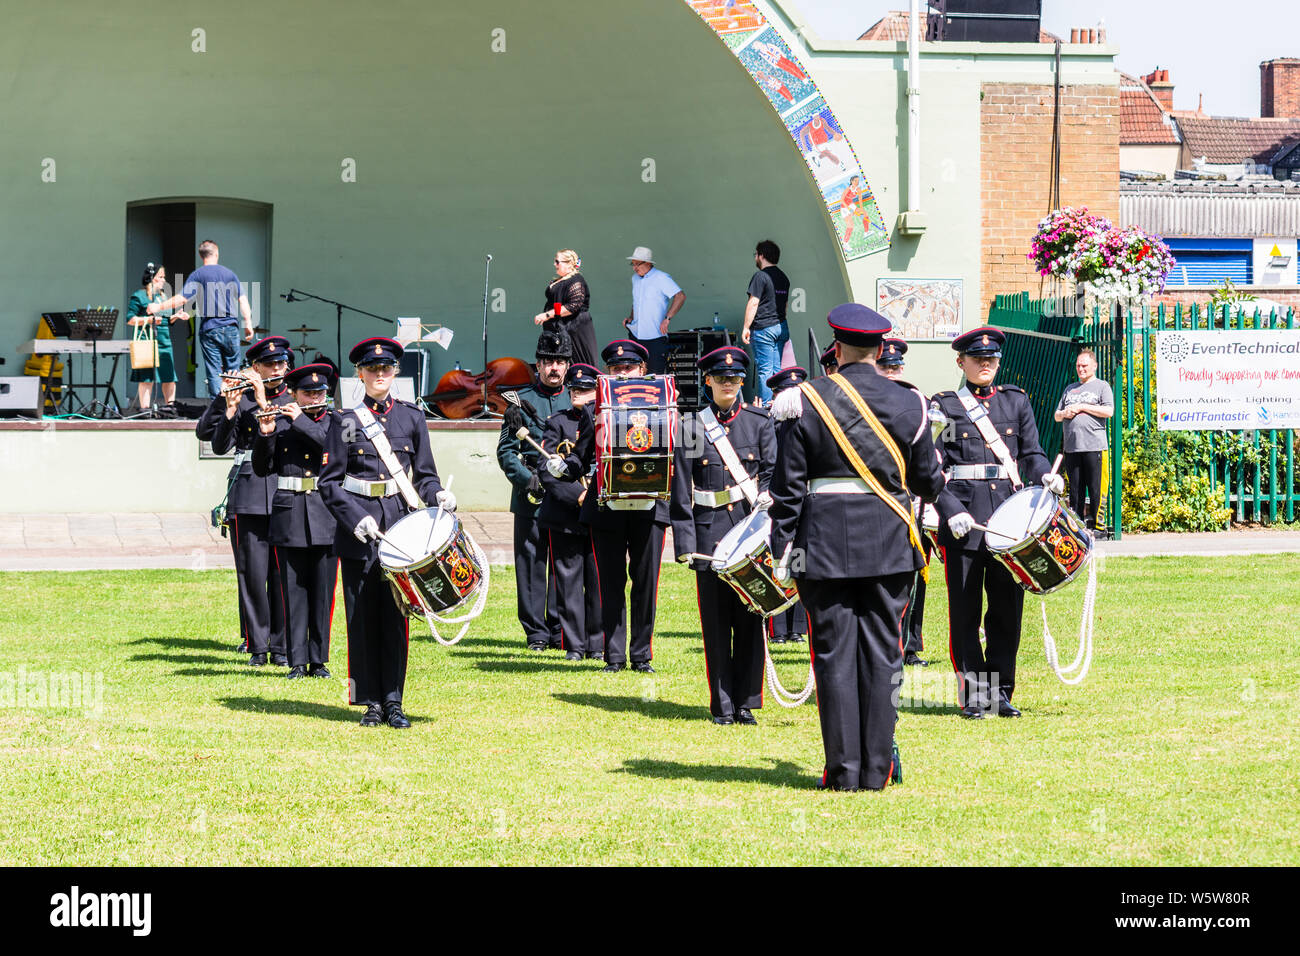 Members of Wiltshire Army cadet force band playing in Trowbridge park in front of the bandstand during the armed forces celebration weekend. Stock Photo